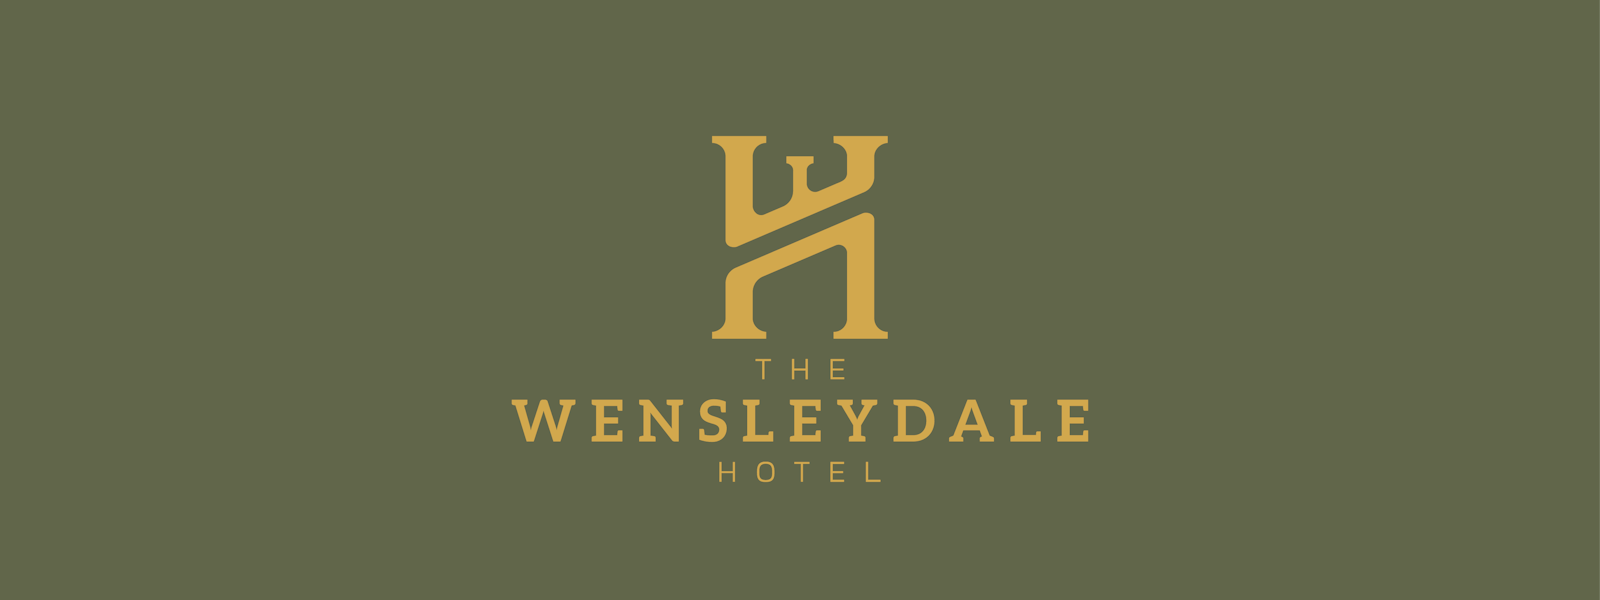 The Wensleydale Hotel Middleham, Yorkshire Dales Boutique Accommodation, The Tack Room Restaurant & Bar